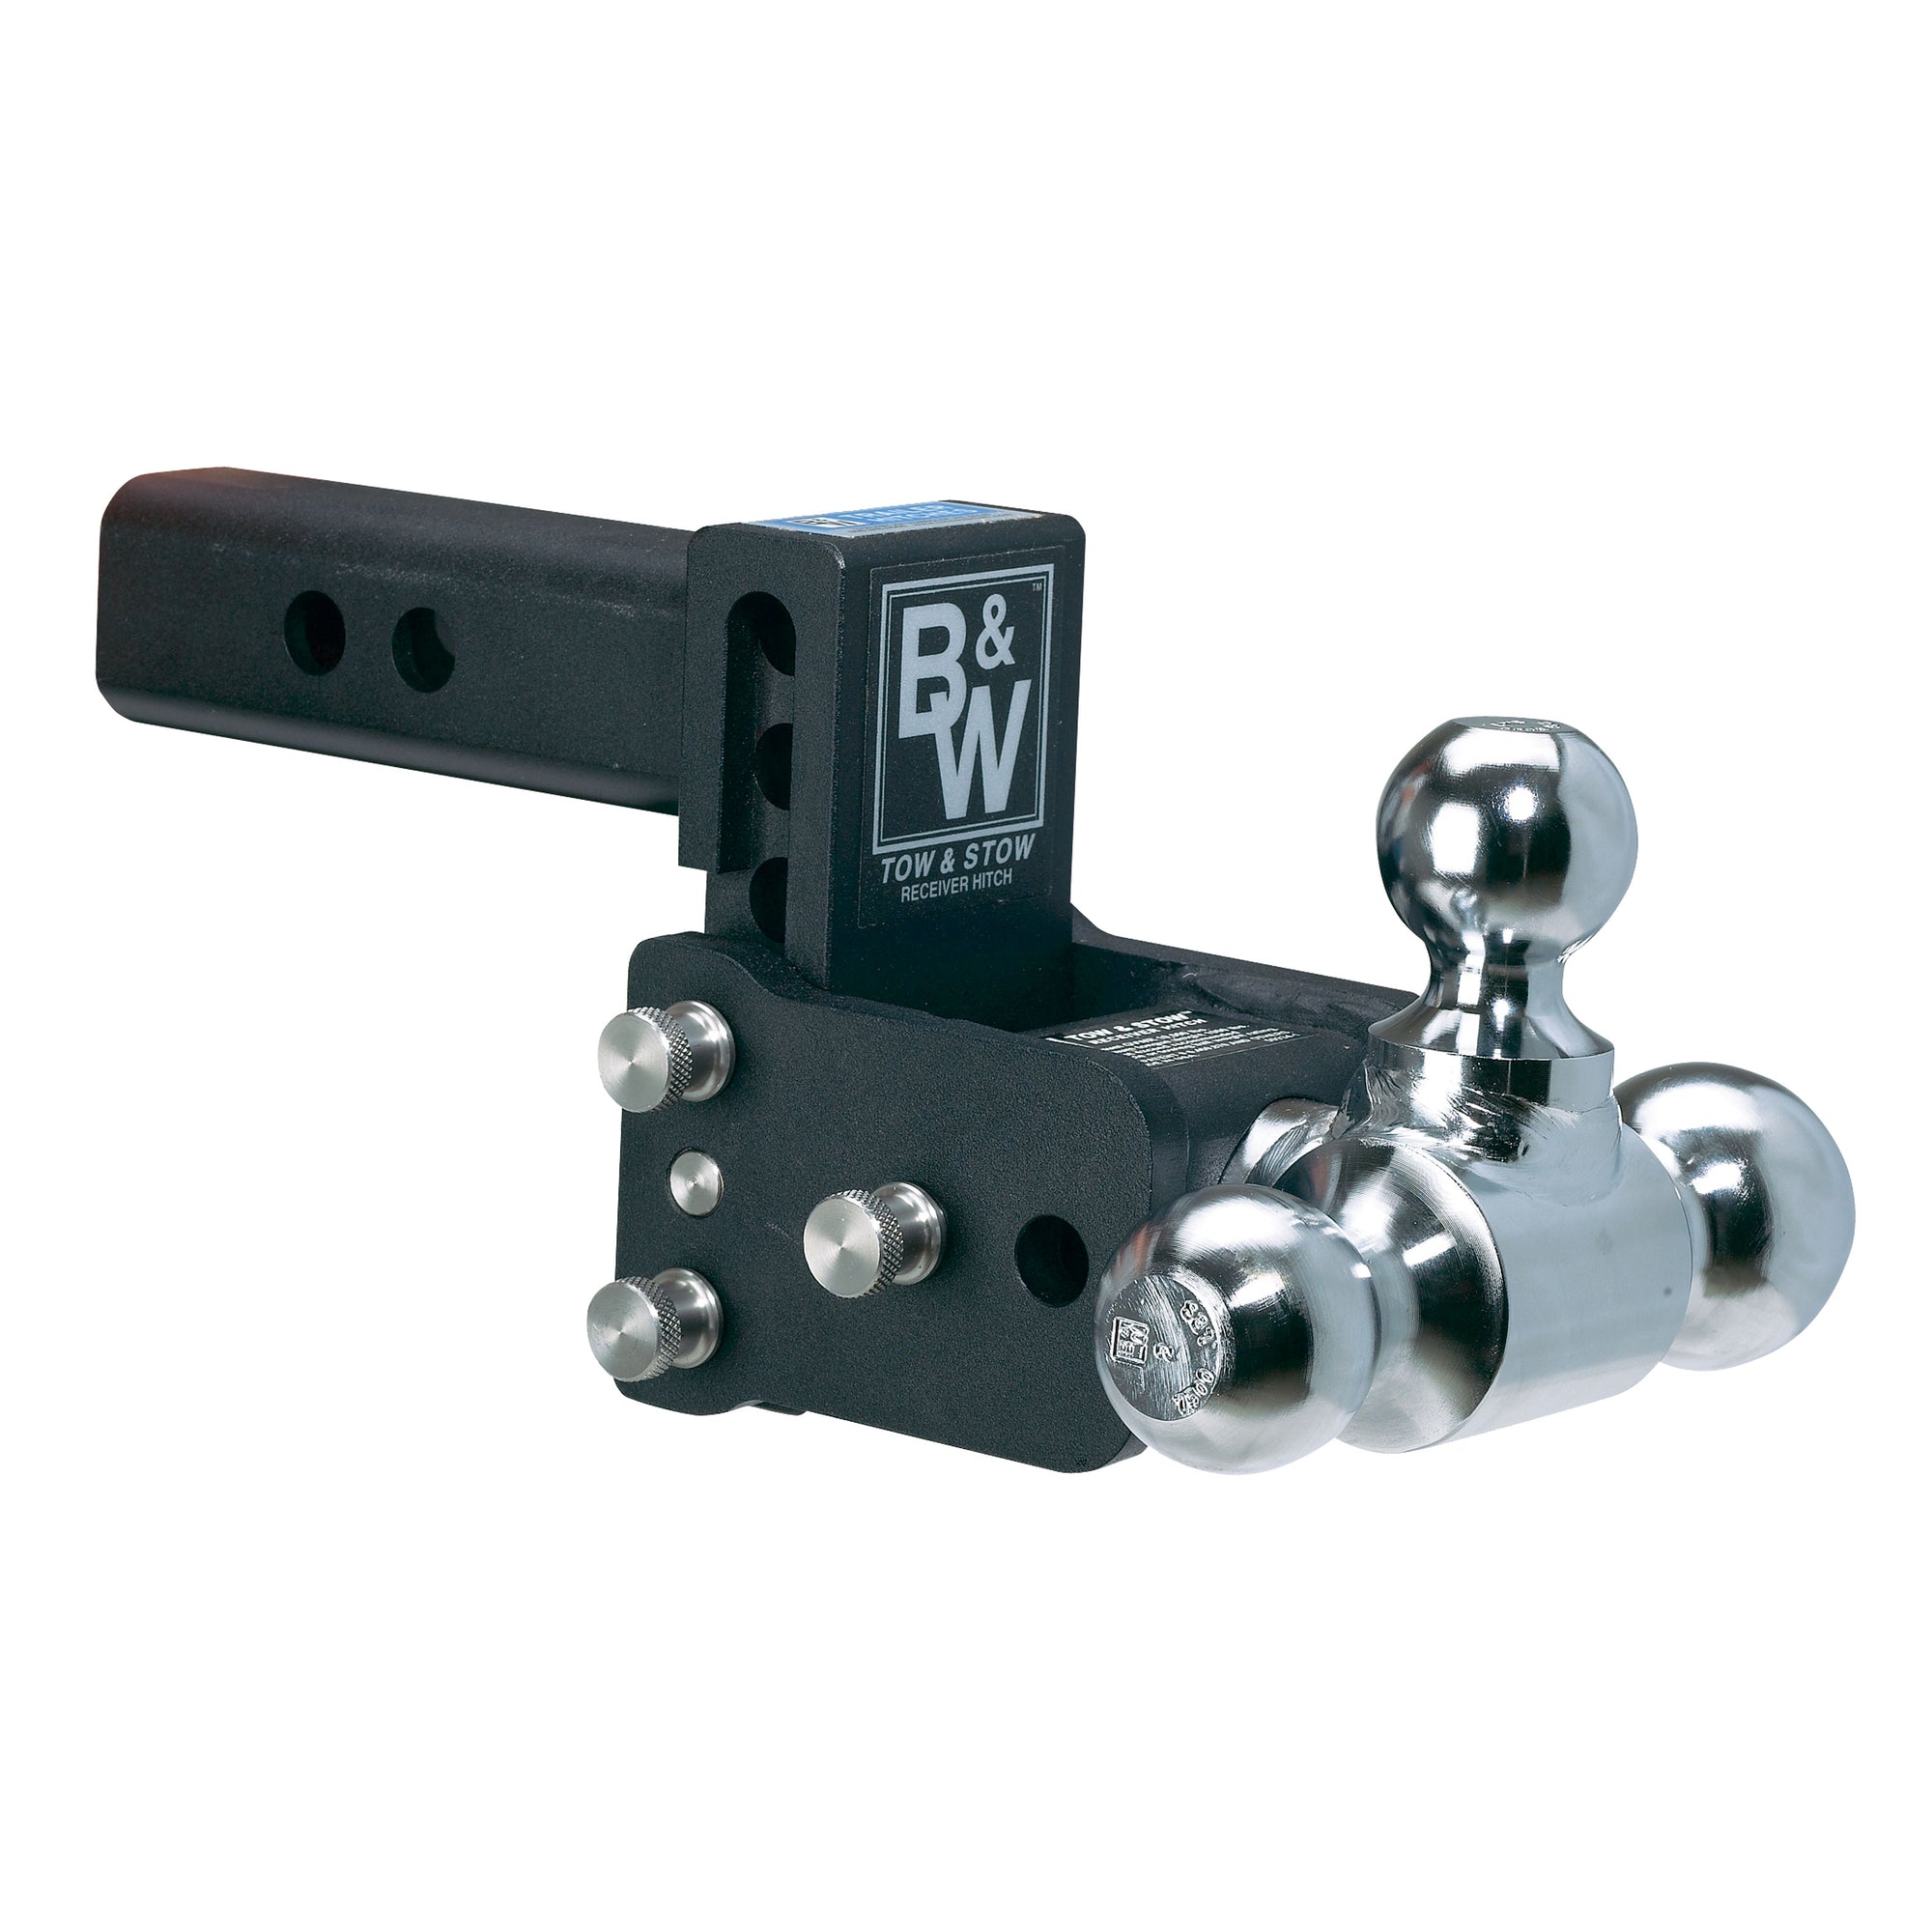 B&W Trailer Hitches TS20049B Tow and Stow Adjustable Ball Mount - 1-7/8", 2" & 2-5/16" Ball, 7" Drop, 7.5" Rise, Black